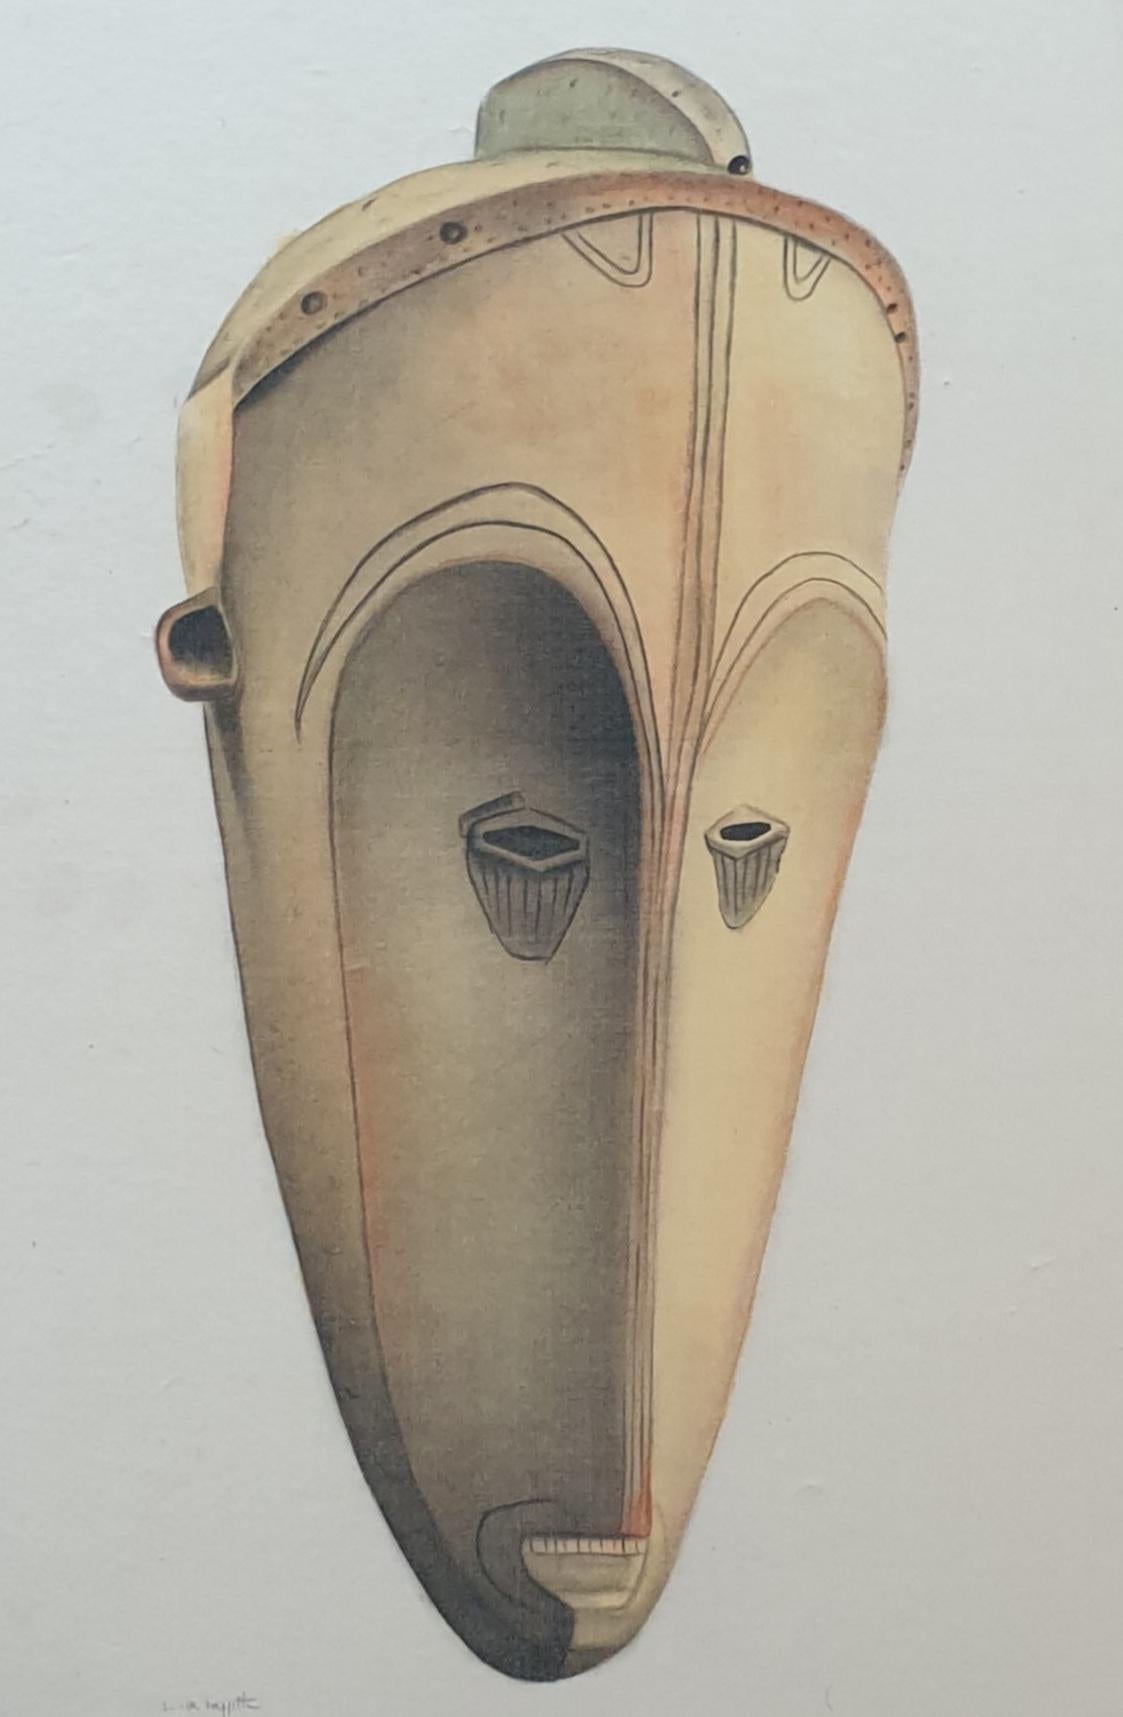 La Roche Laffitte Still-Life - African Ngil Mask. Watercolour on Handmade Paper on Vélin d'Arches.